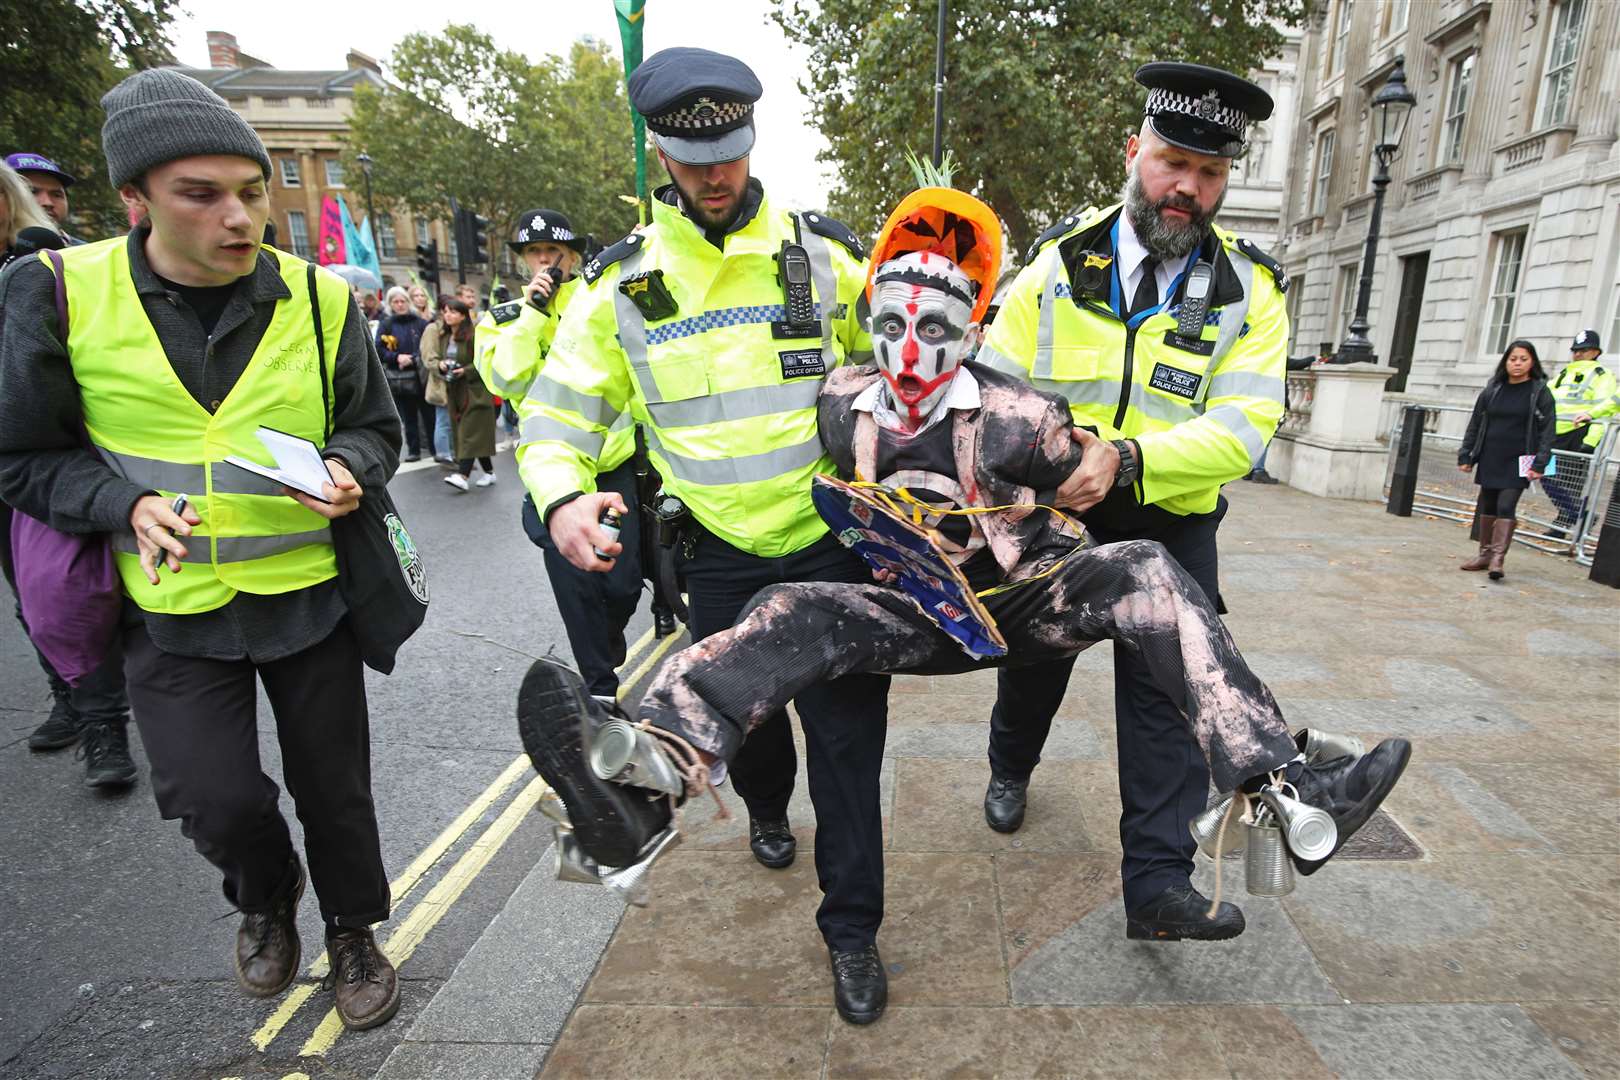 Yui Mok’s picture of police holding a protester during an Extinction Rebellion demonstration was praised by the judges (Yui Mok/PA)